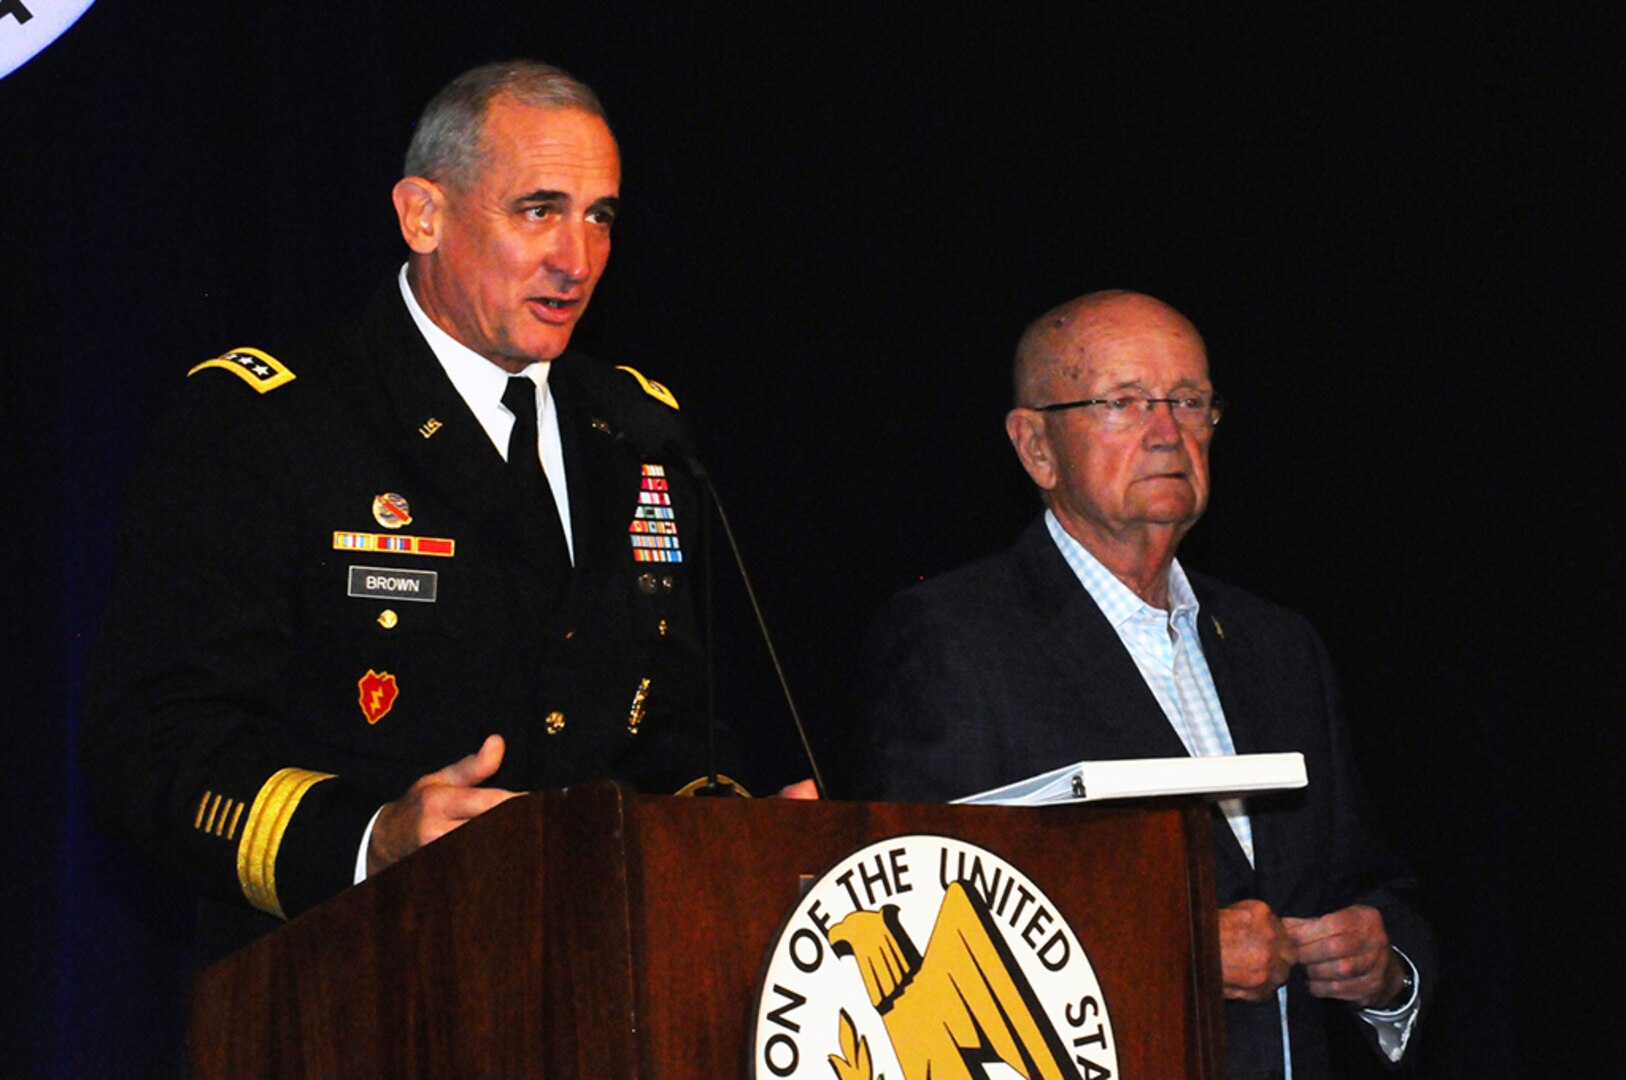 HONOLULU, Hawaii (May 25, 2016) - Gen. Robert B. Brown (left) honors Association of the United States Army President, retired U.S. Army Gen. Gordon R. Sullivan, for his 56 years of public service, which include over three decades of active duty service in the Army. LANPAC 2016 will be Sullivan's last symposium as he prepares to step down as AUSA President. 